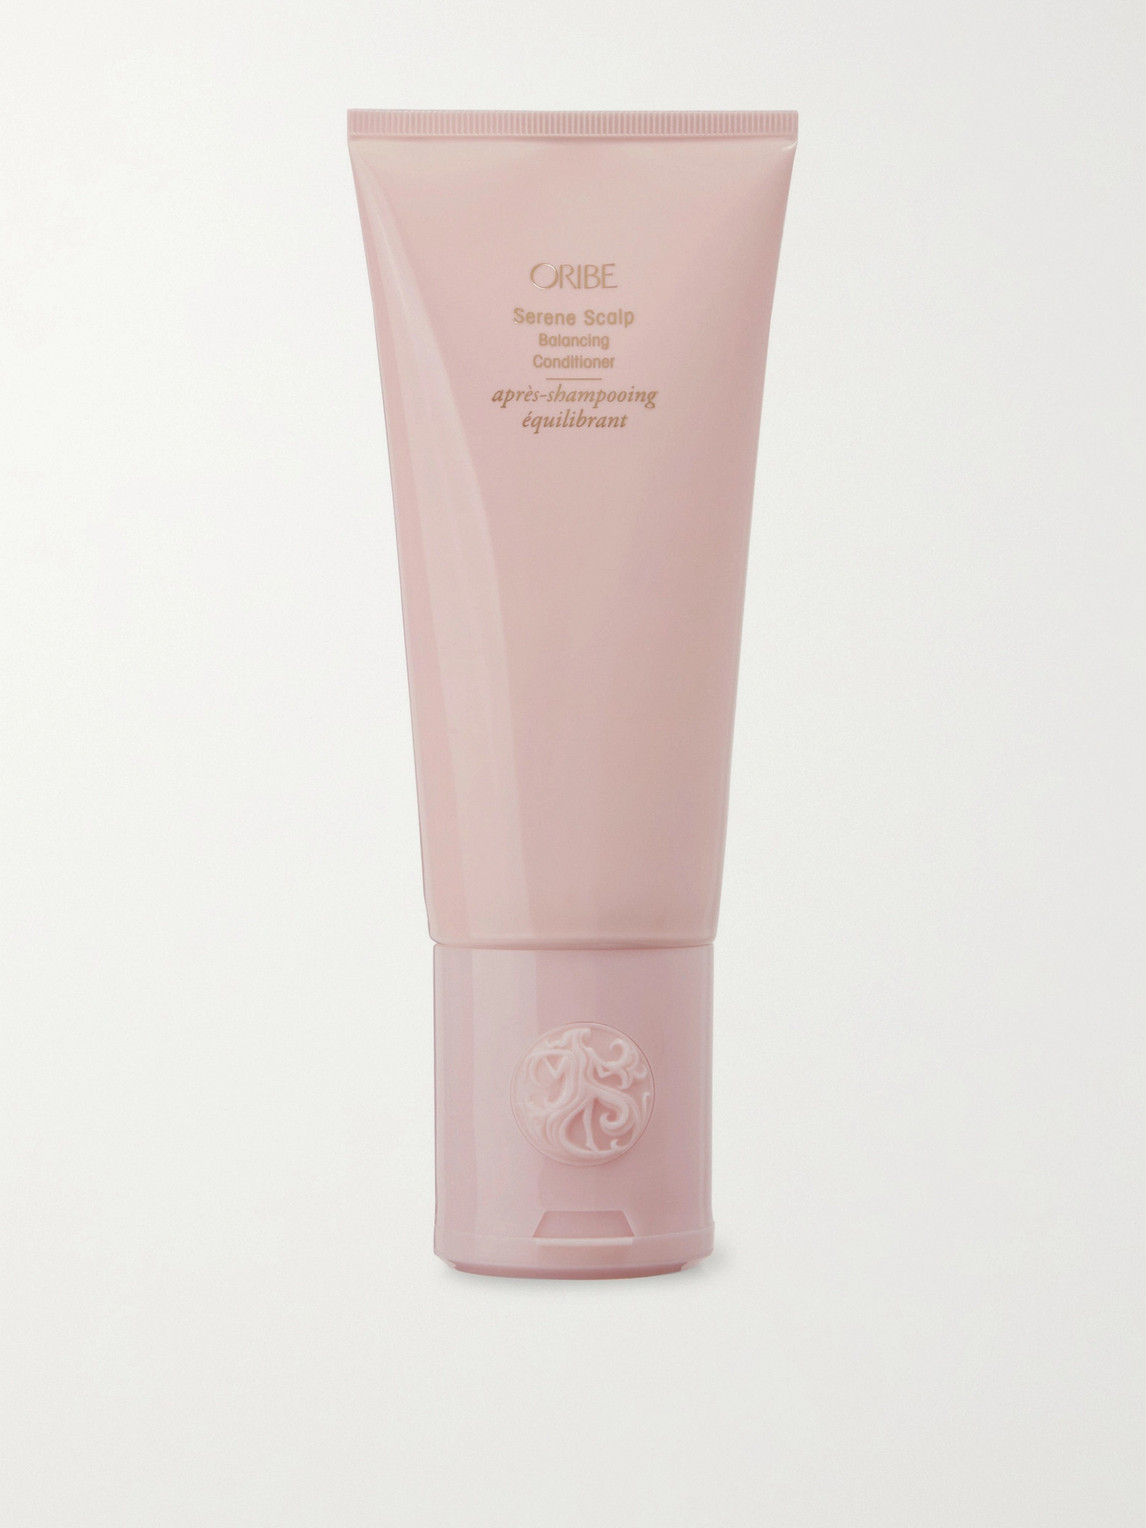 Oribe Serene Scalp Balancing Conditioner, 200ml In Colorless